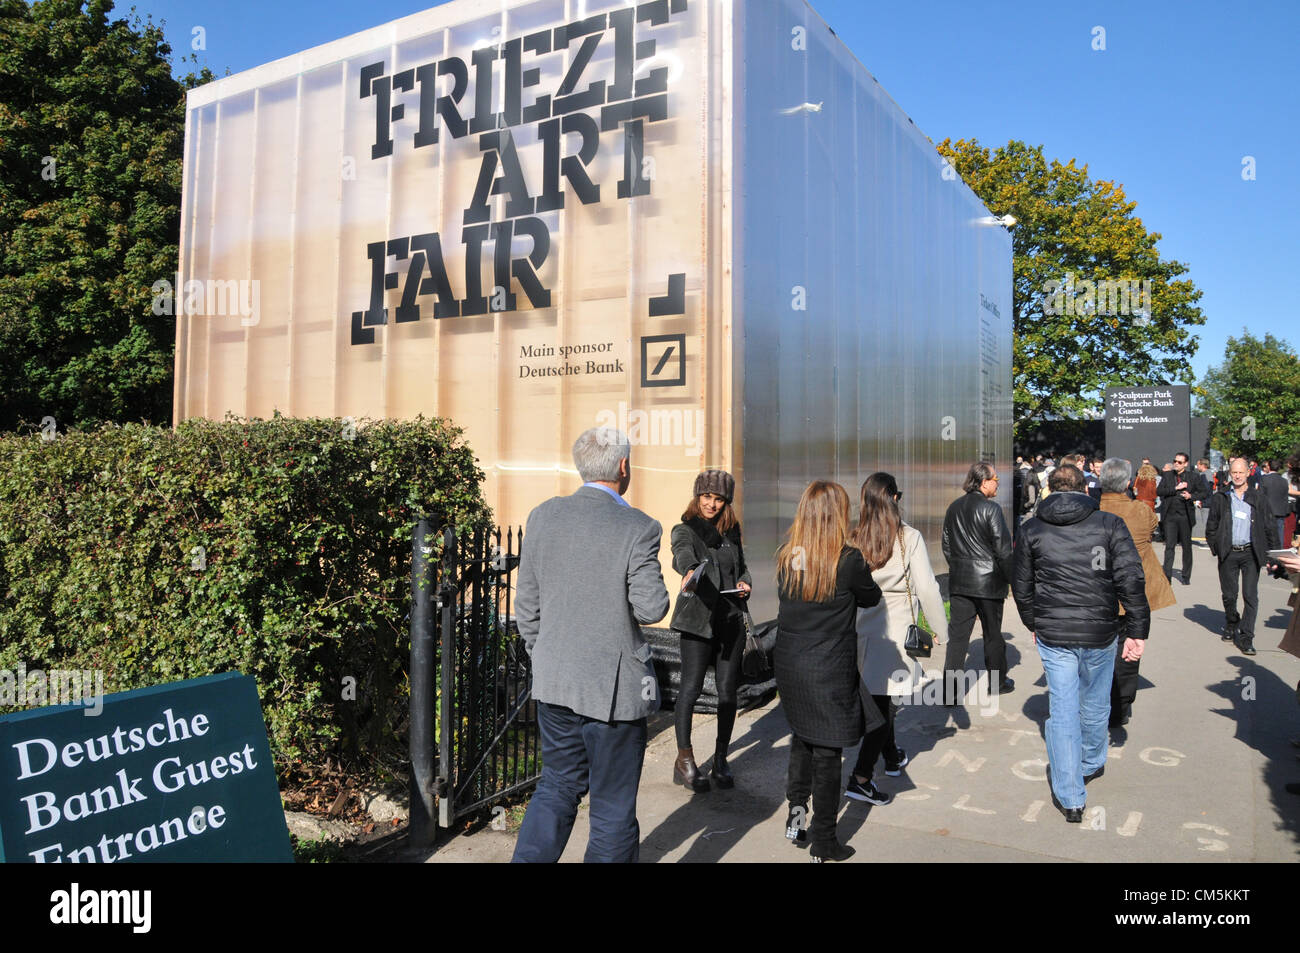 Regents Park, London, UK. 10th October 2012. Visitors arrive at the Frieze Art Fair in Regents Park. The largest contemporary art event in the UK opens to the public. The art fair is sponsored by Deutsche Bank and features work by over a 1,000 living artists. Credit:  Matthew Chattle / Alamy Live News Stock Photo